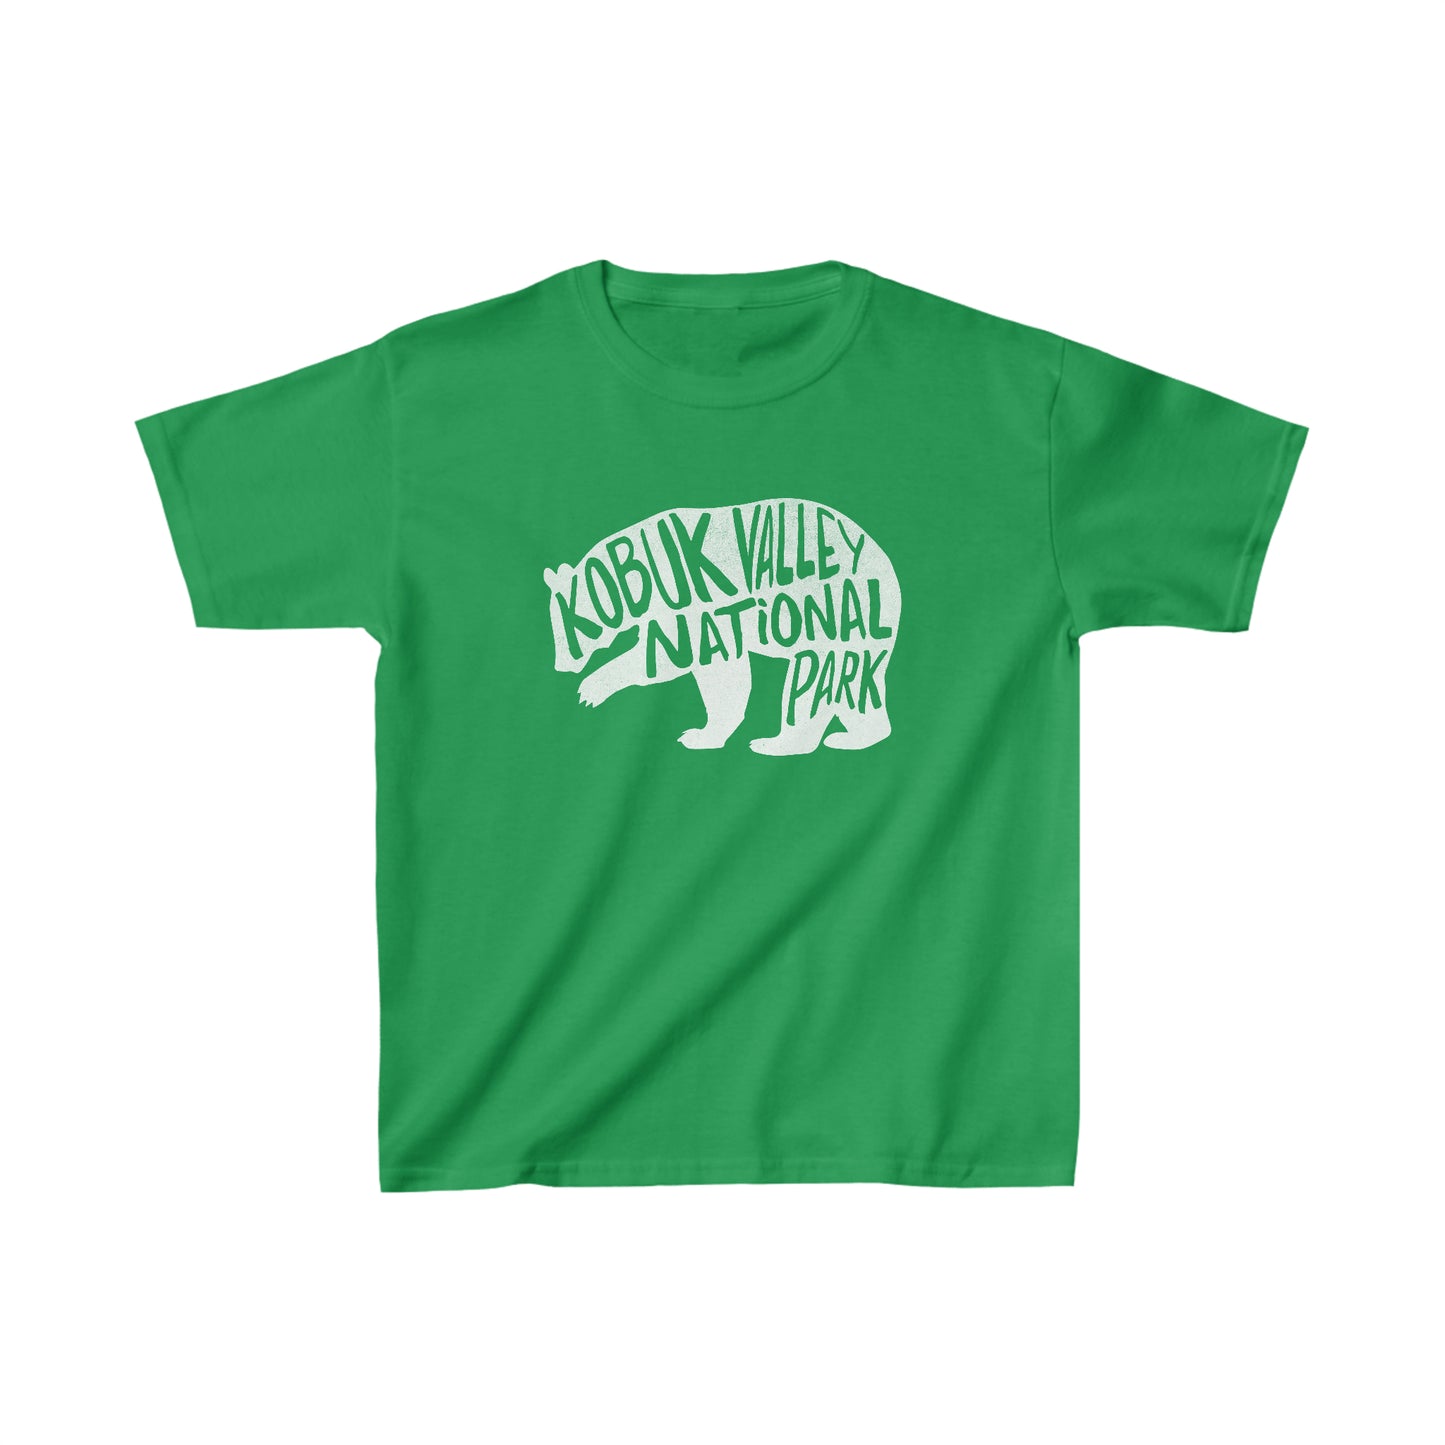 Kobuk Valley National Park Child T-Shirt - Grizzly Bear Chunky Text